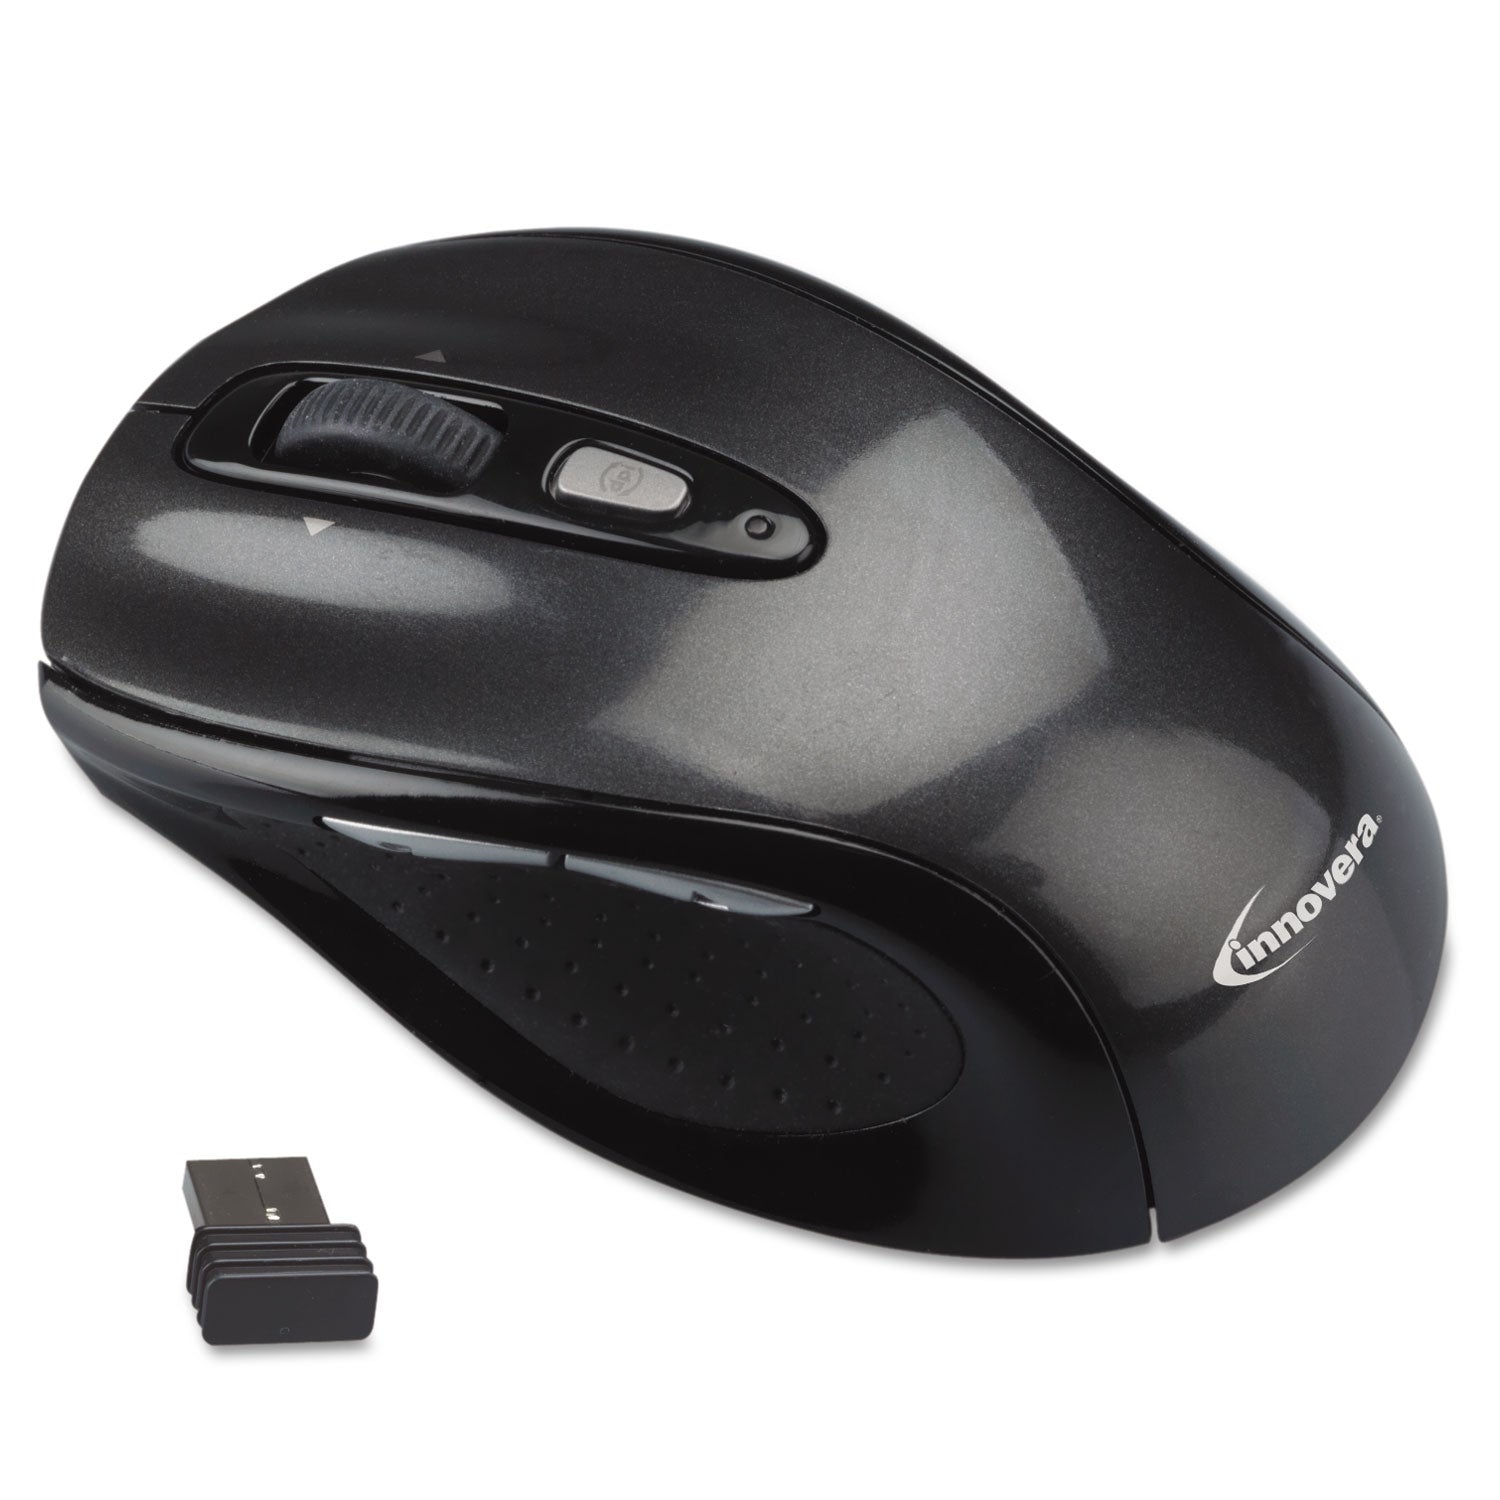 Wireless Optical Mouse with USB-A, 2.4 GHz Frequency/32 ft Wireless Range, Left/Right Hand Use, Gray/Black - 